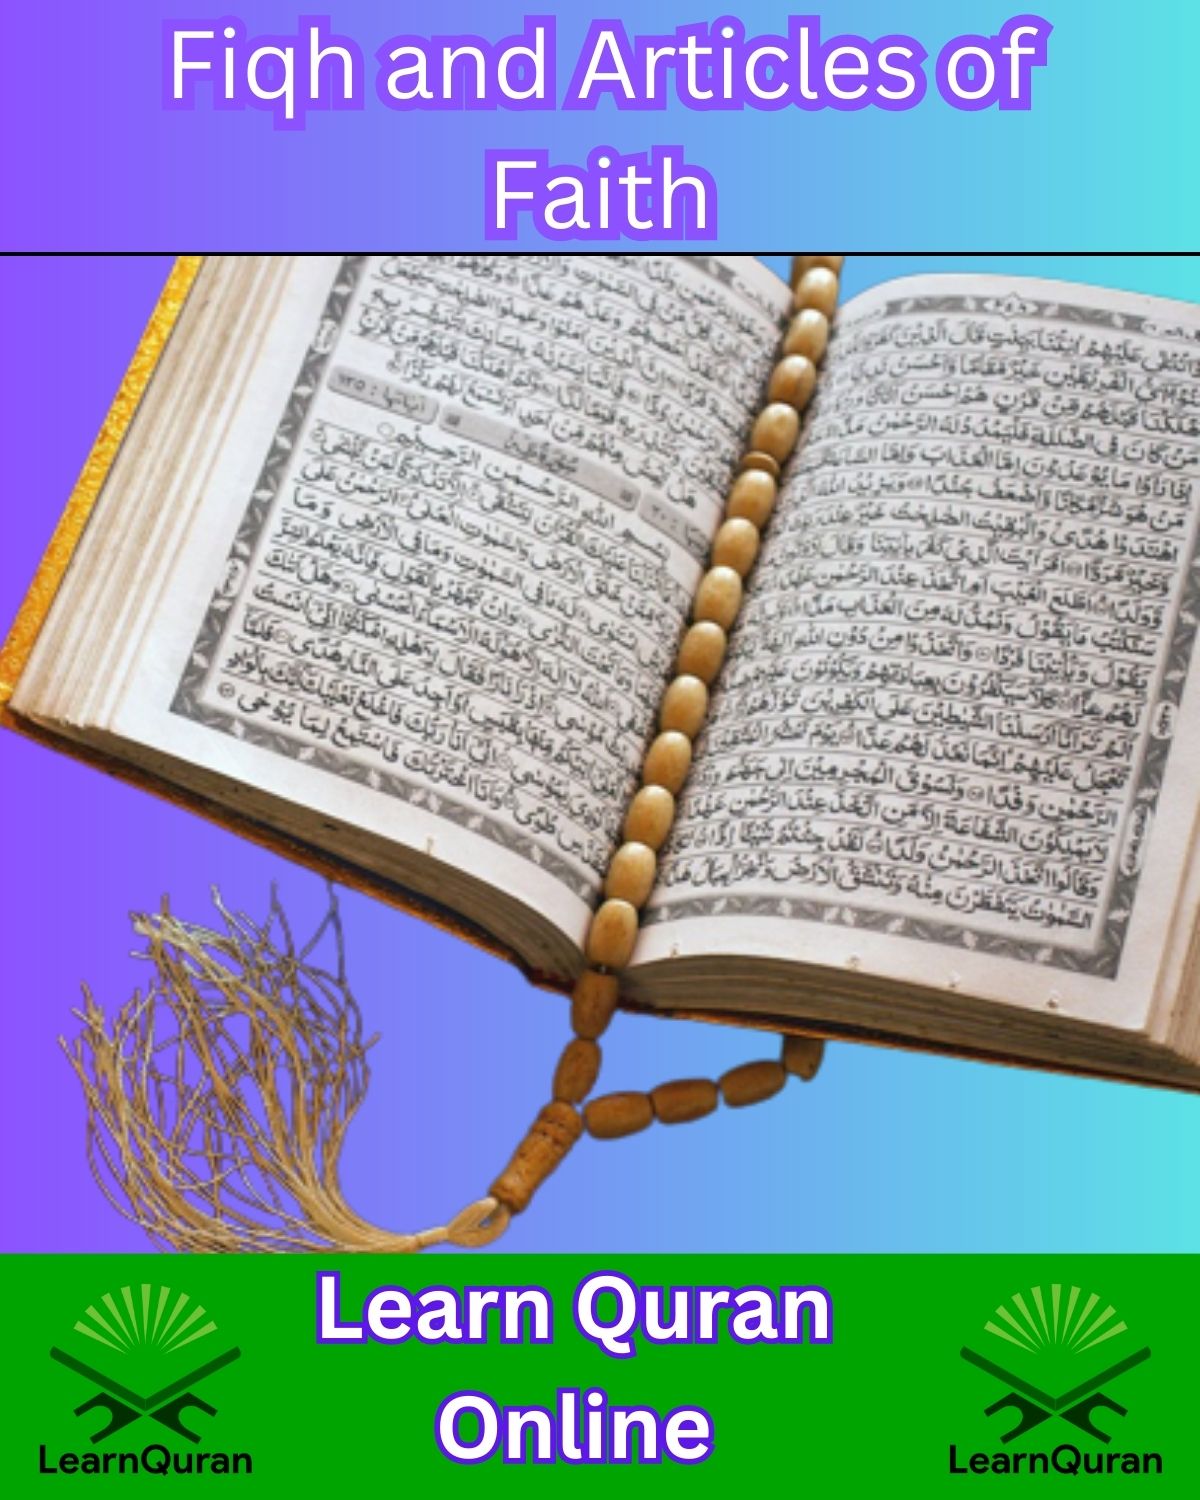 Fiqh and Articles of Faith